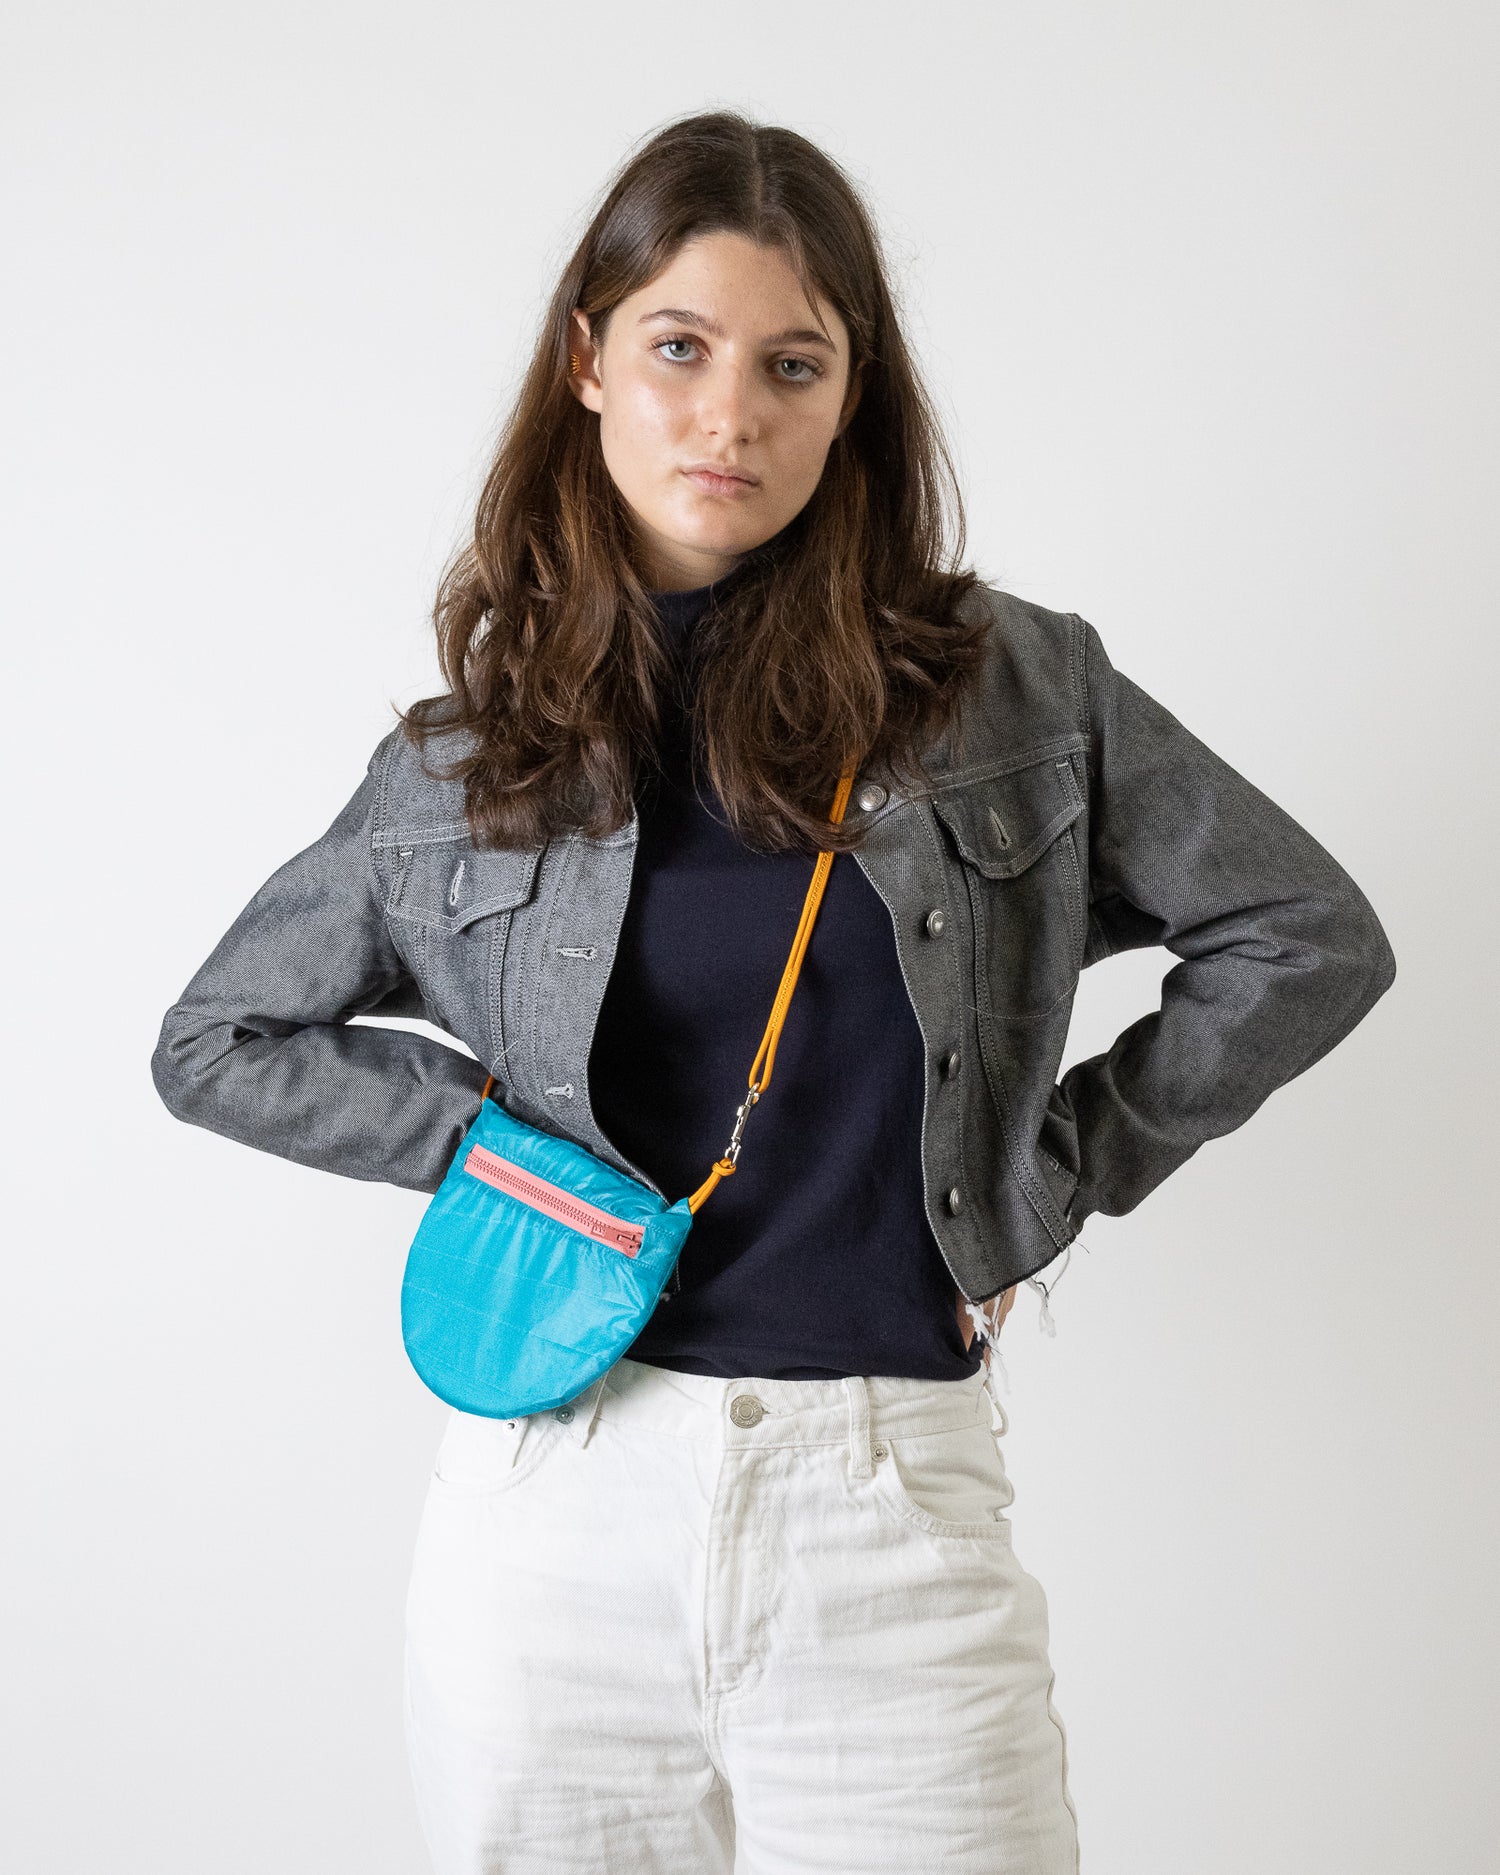 Model wears teal sling bag with dusty rose zipper made from upcycled paraglider nylon U.BAG